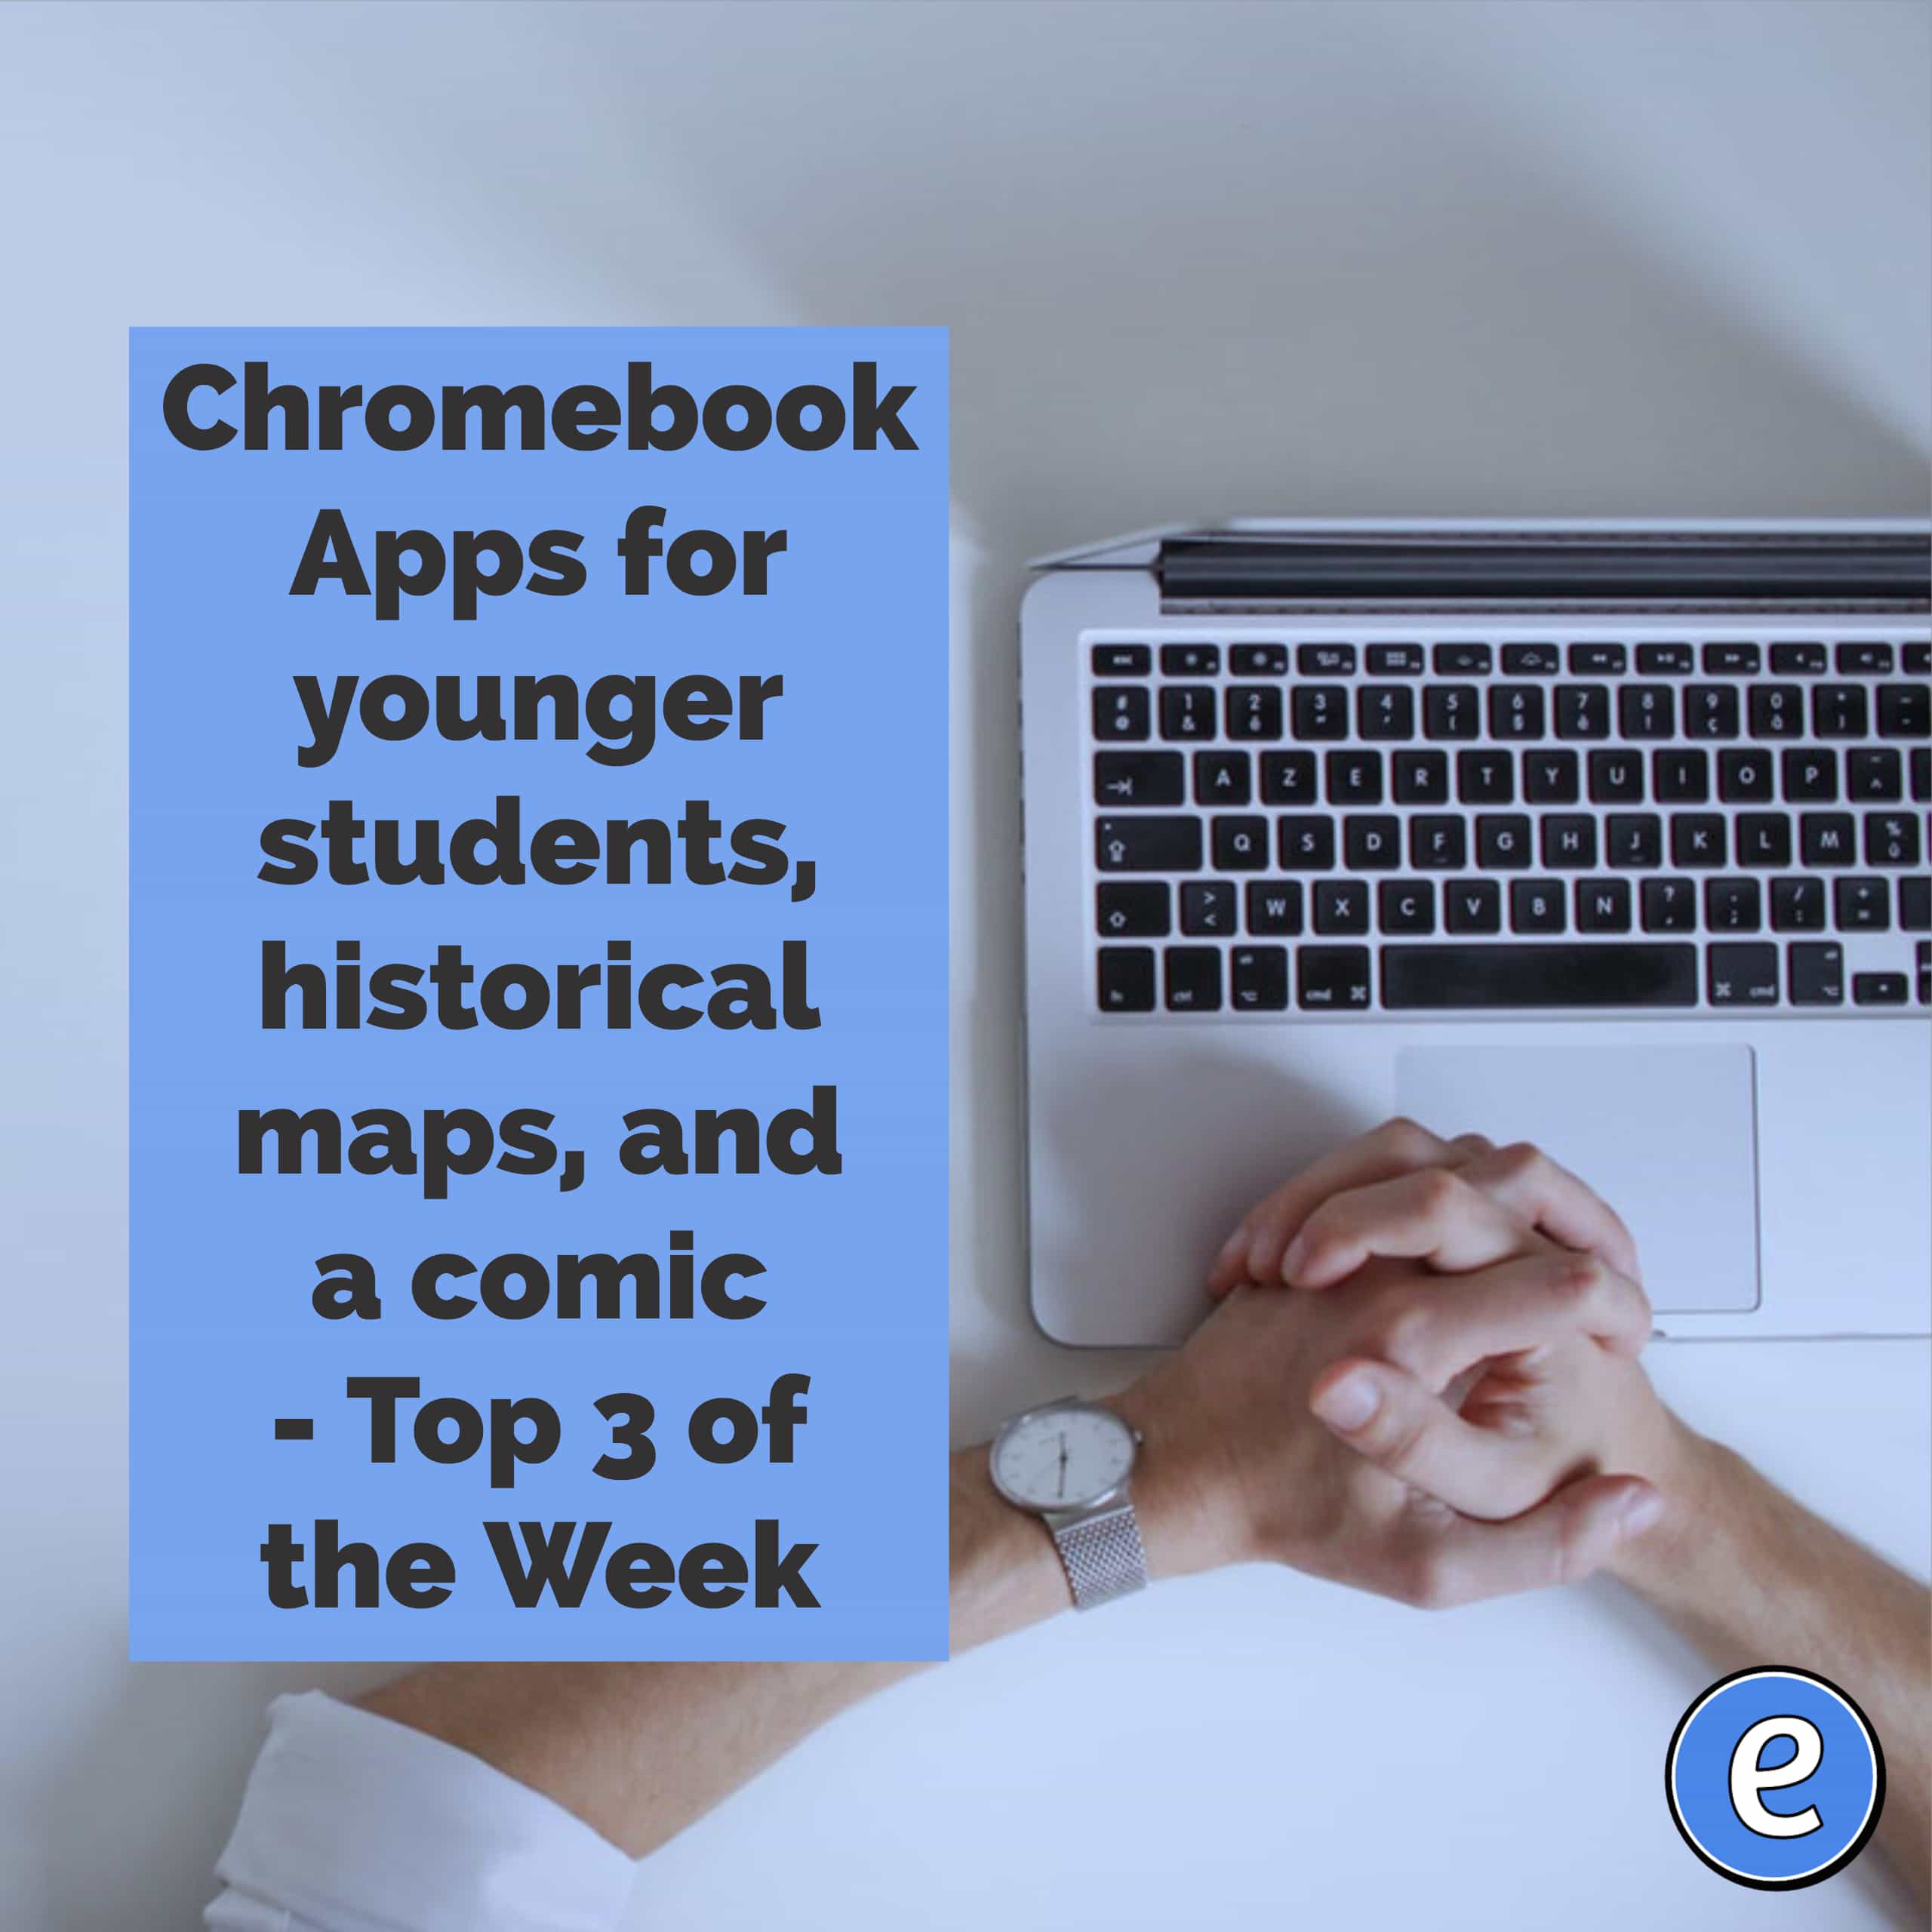 Chromebook Apps for younger students, historical maps, and a comic – Top 3 of the Week